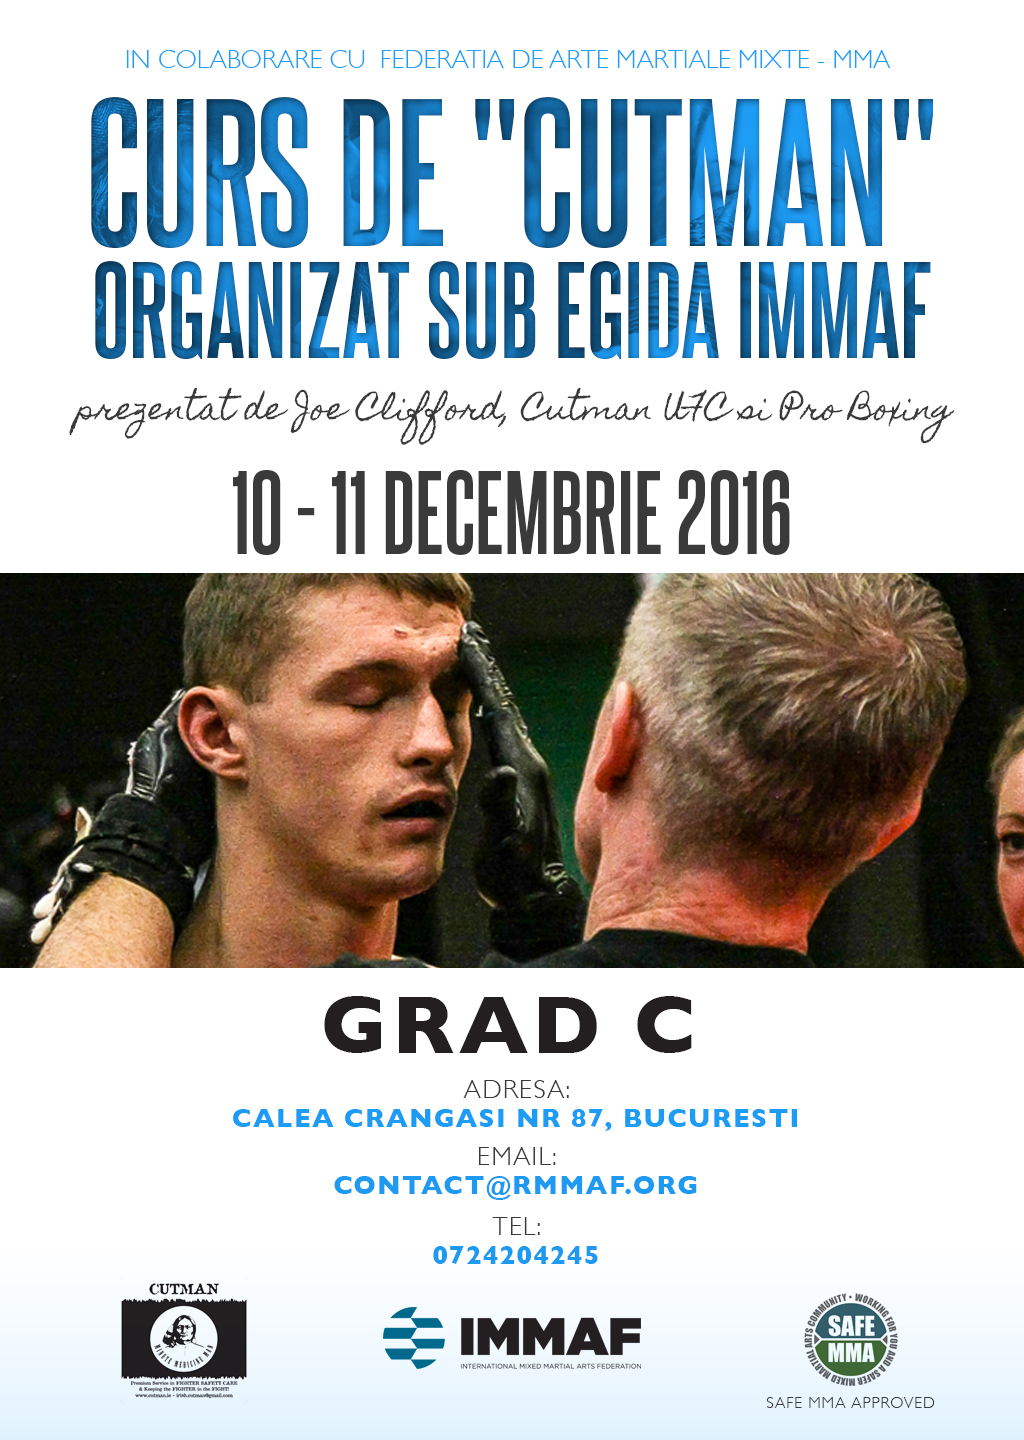 IMMAF ANNOUNCES CUTMAN COURSES IN EUROPE IN PARTNERSHIP WITH JOE CLIFFORD